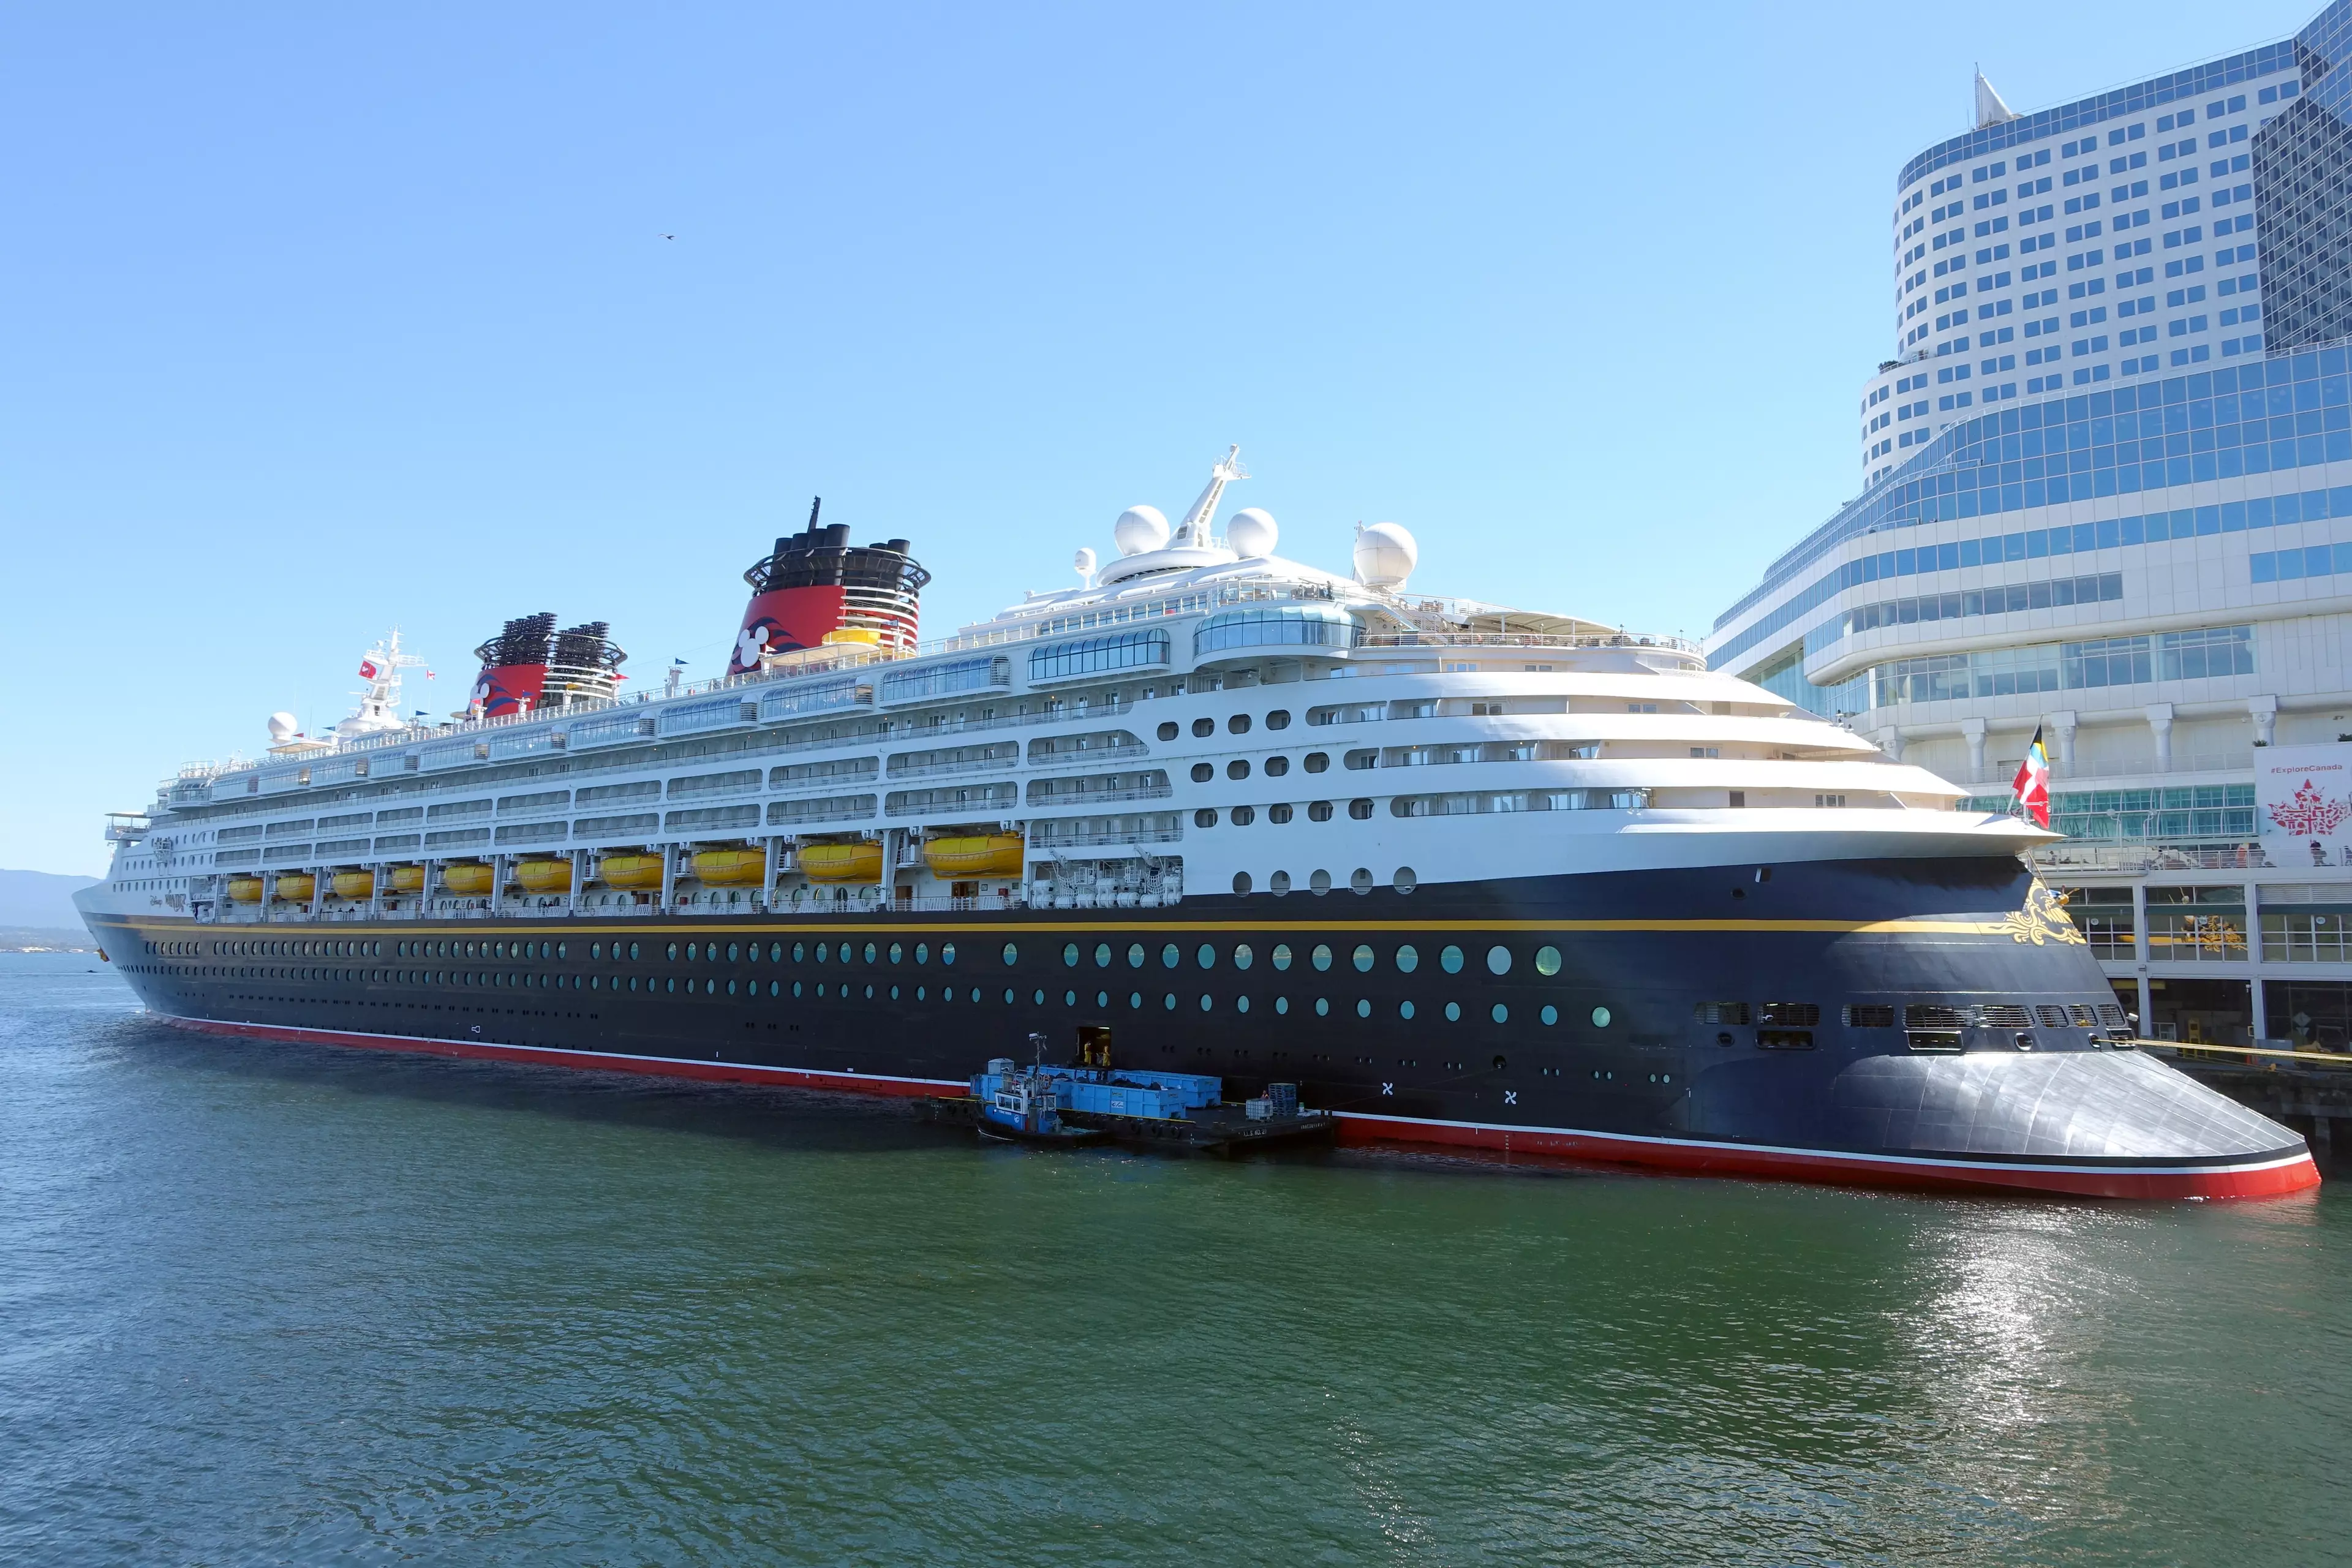 The Disney Wonder cruise ship, one of four existing ships in the line.